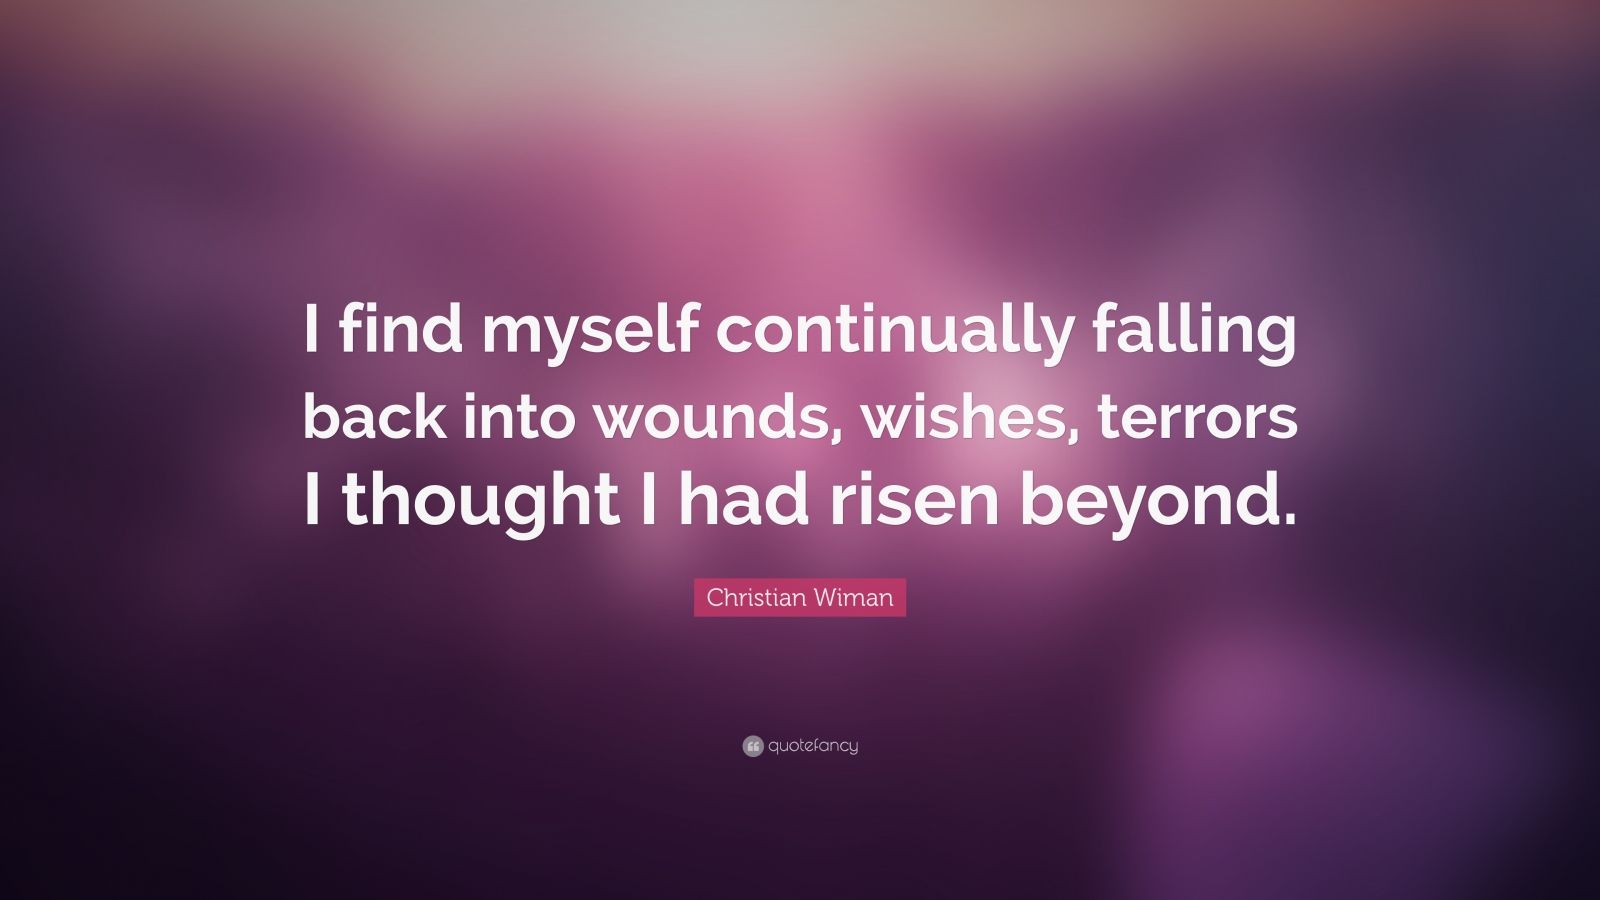 Christian Wiman Quote “I find myself continually falling back into wounds wishes